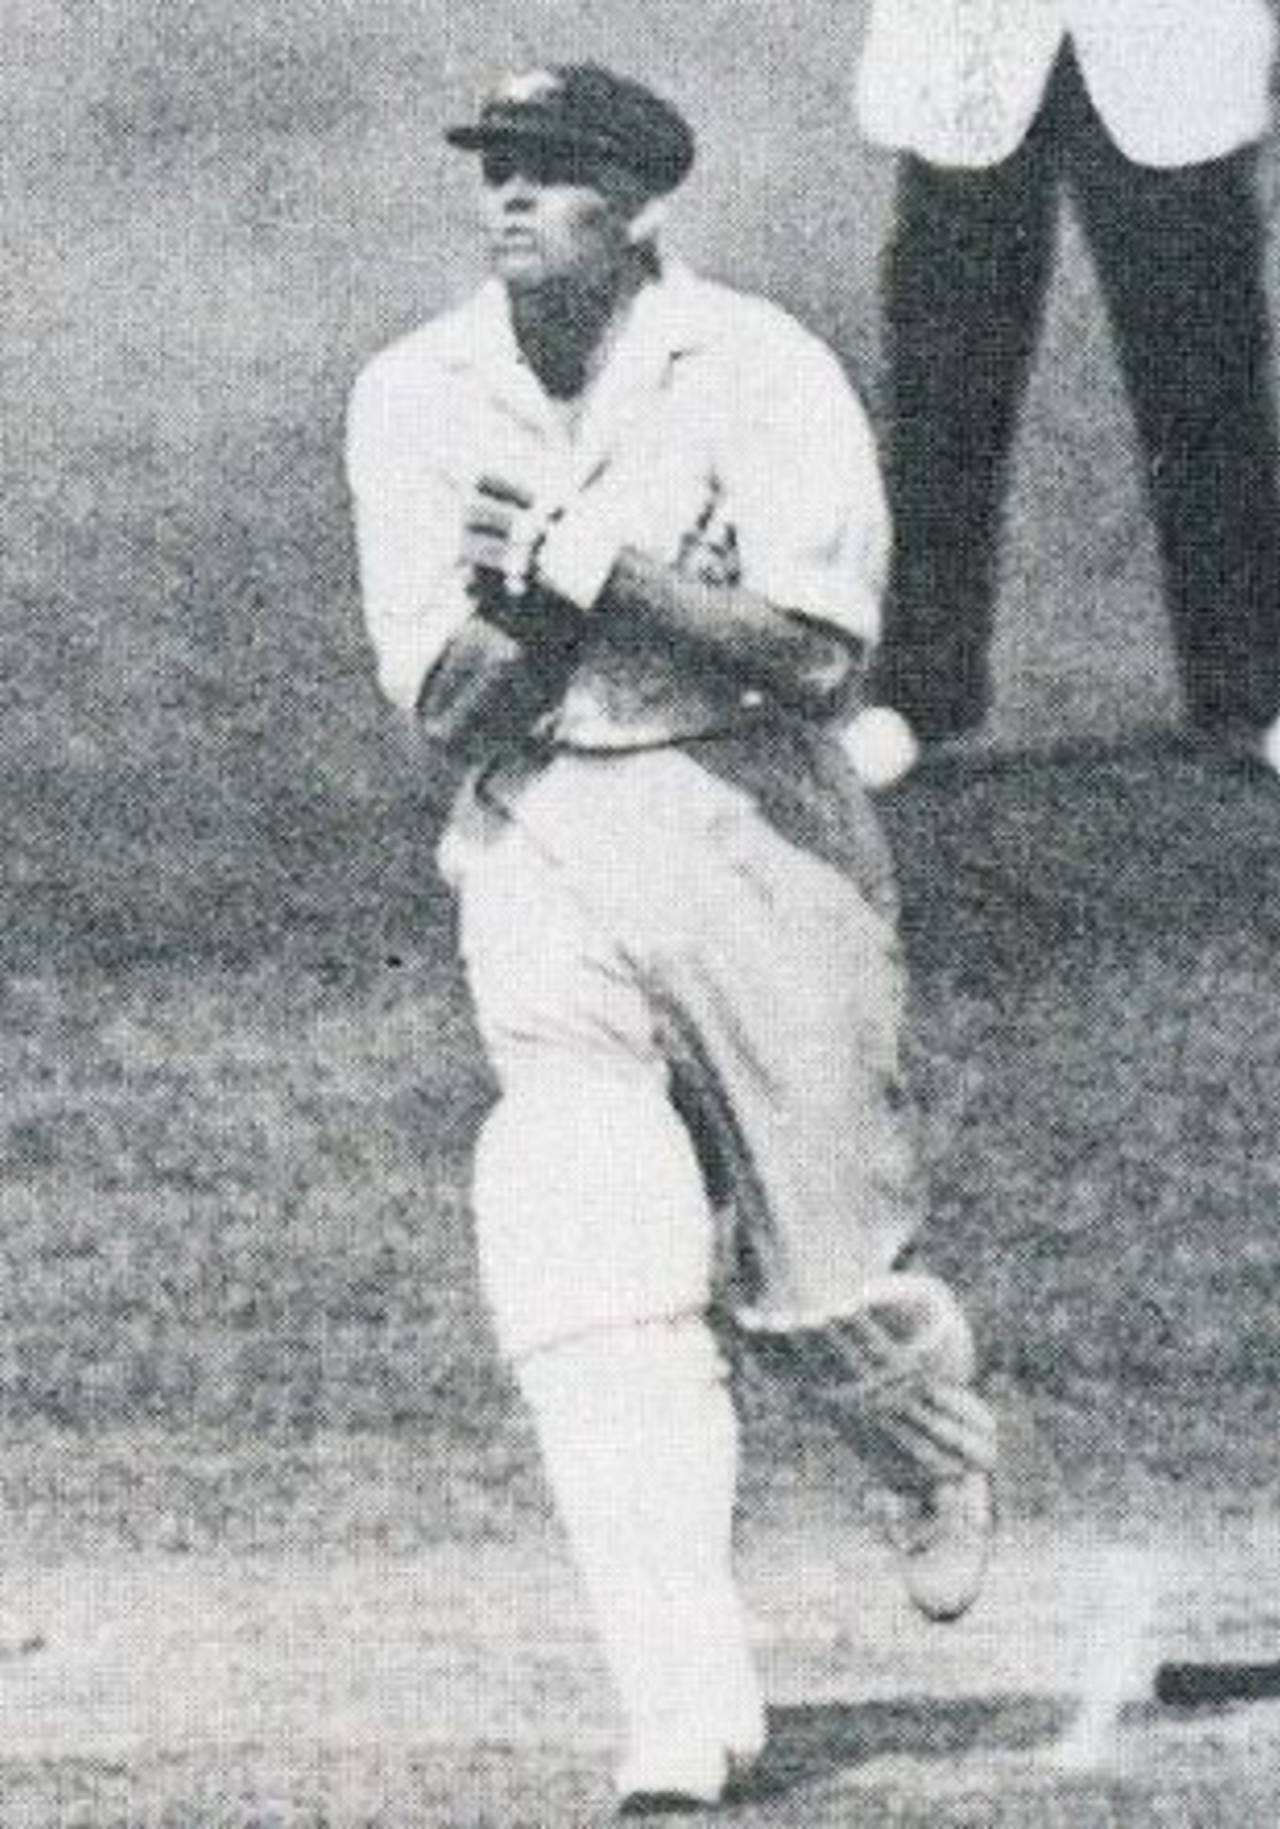 Where were you when Bill Woodfull was struck on the heart by Harold Larwood in the Bodyline series?&nbsp;&nbsp;&bull;&nbsp;&nbsp;The Cricketer International